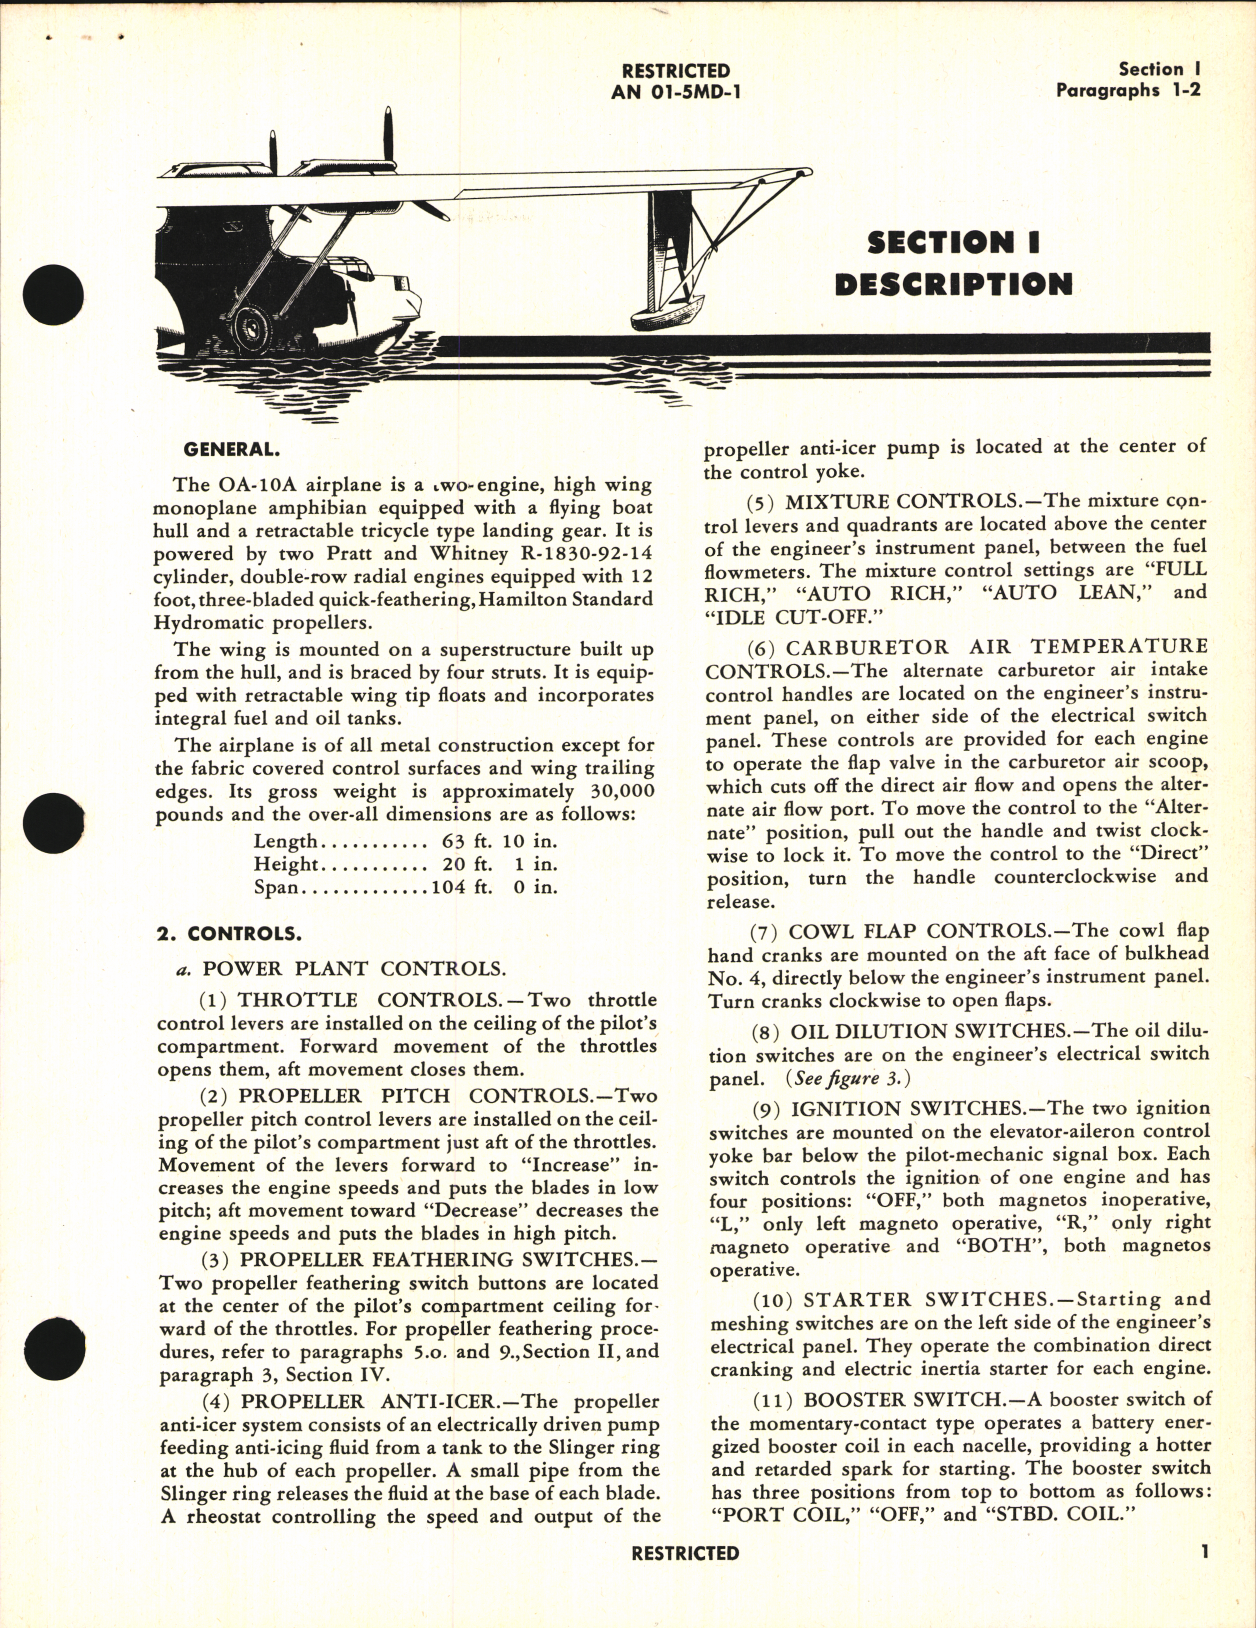 Sample page 5 from AirCorps Library document: Pilot's Handbook for Army Model OA-10A Airplane